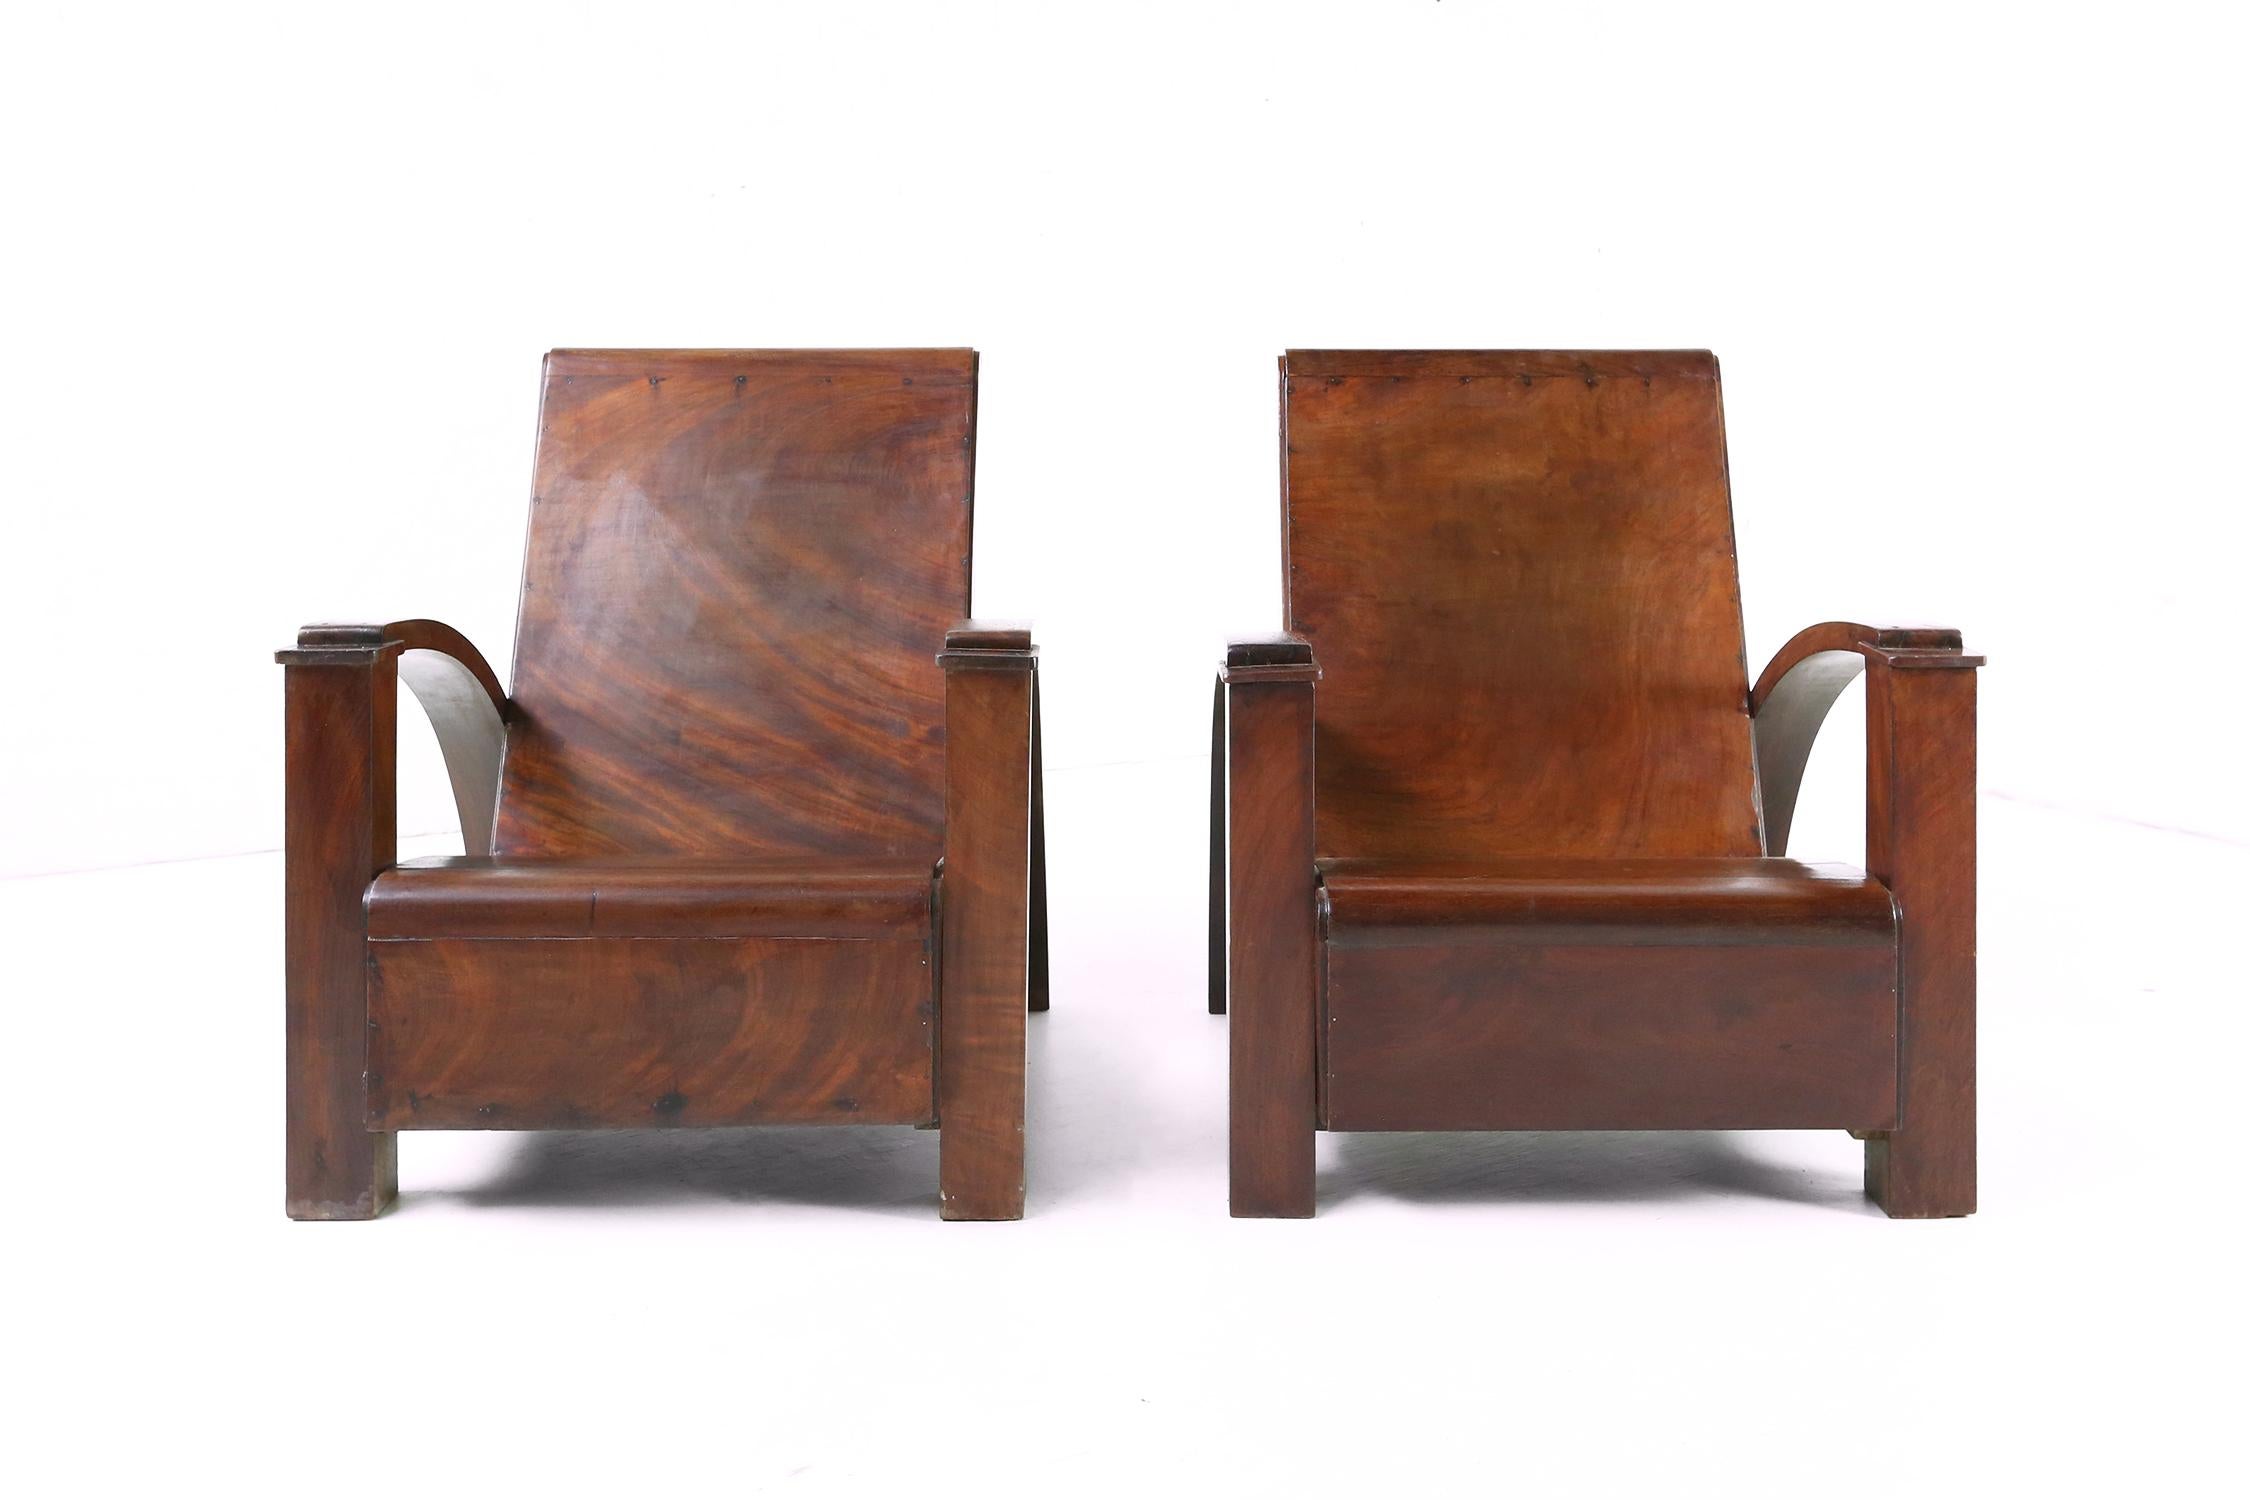 Rare French colonial lounge chairs dating, circa 1940s, in great condition.